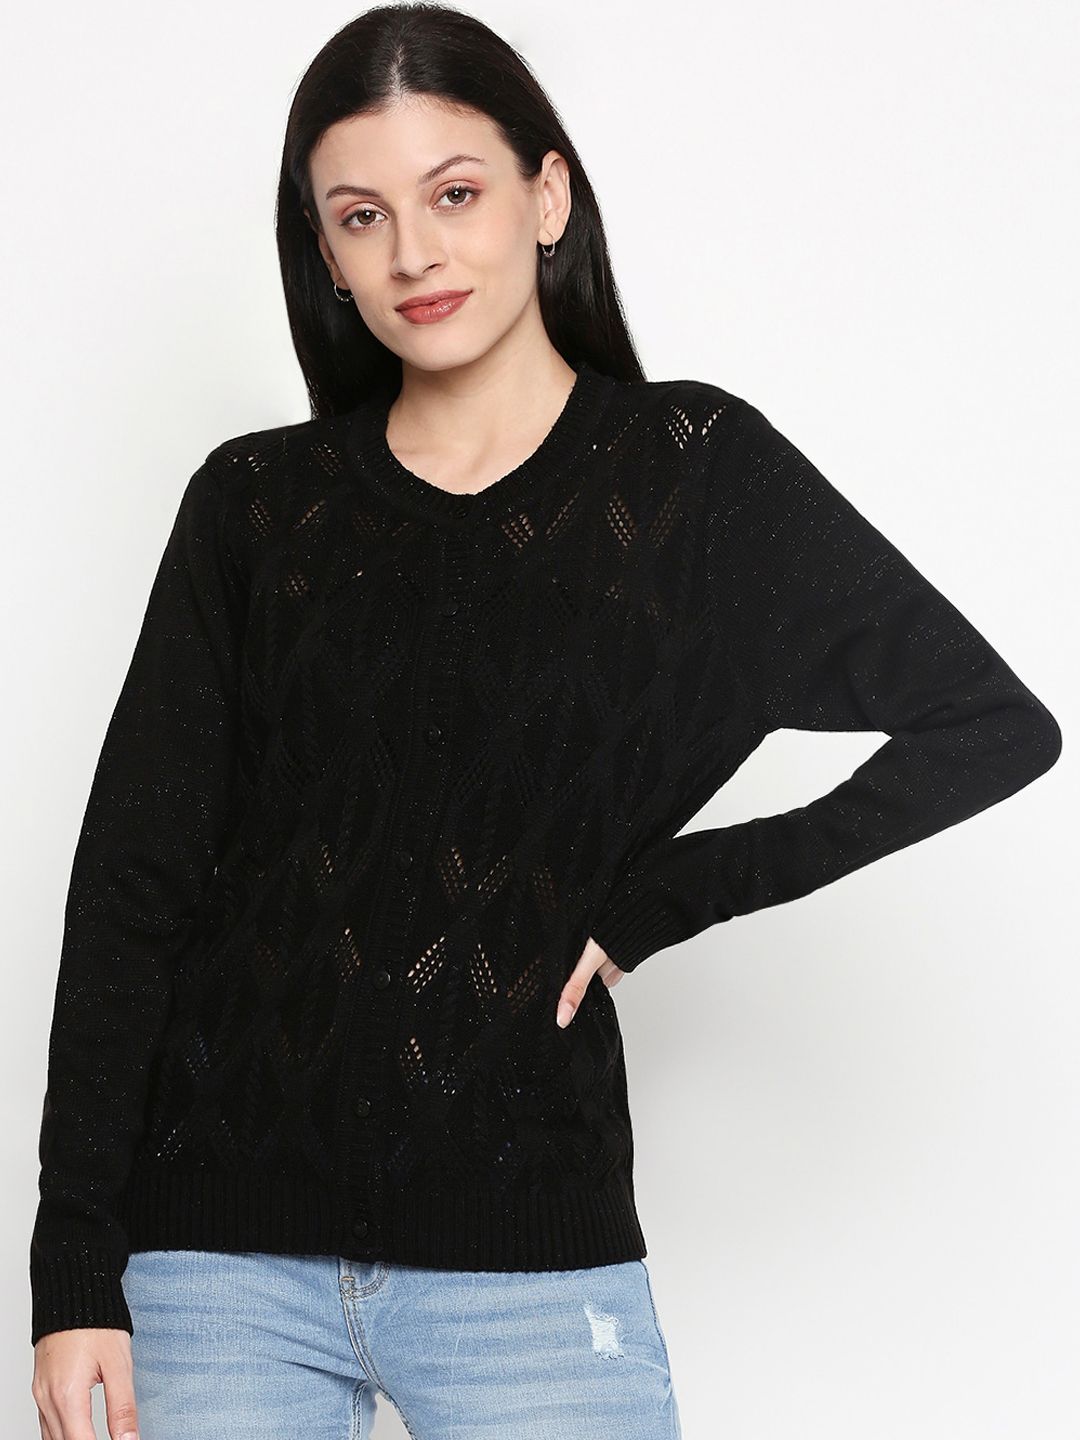 RANGMANCH BY PANTALOONS Women Black Solid Pullover Sweater Price in India